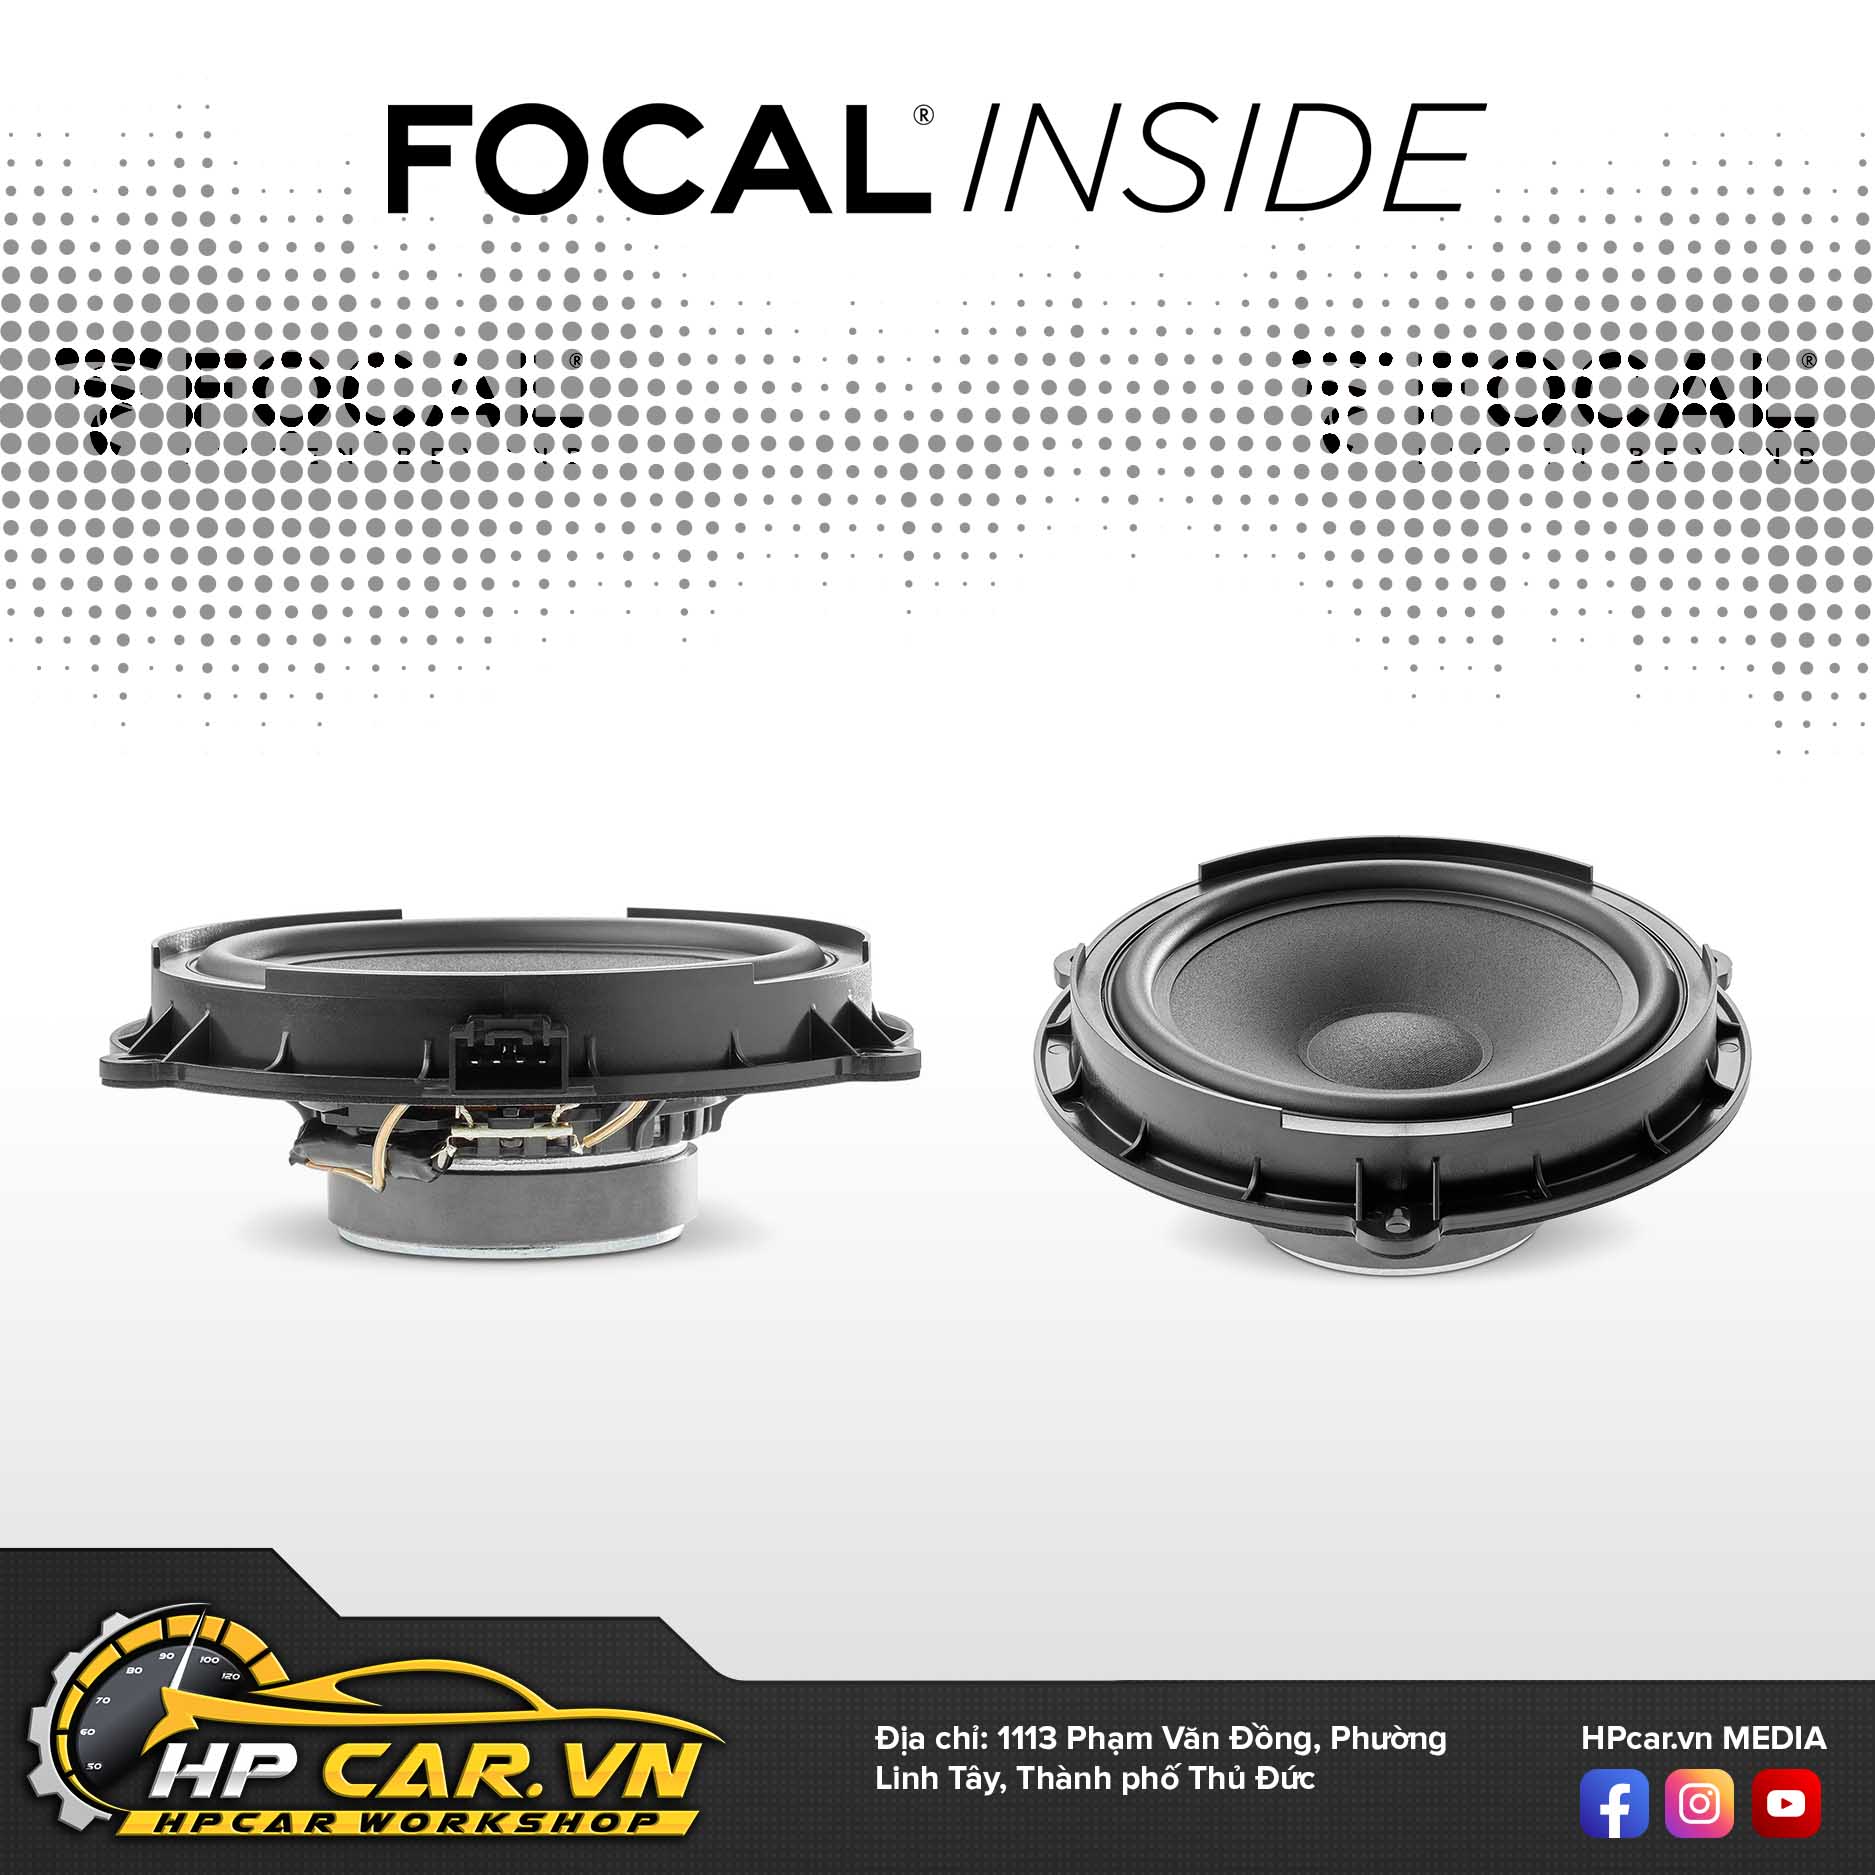 Focal ic Ford 165